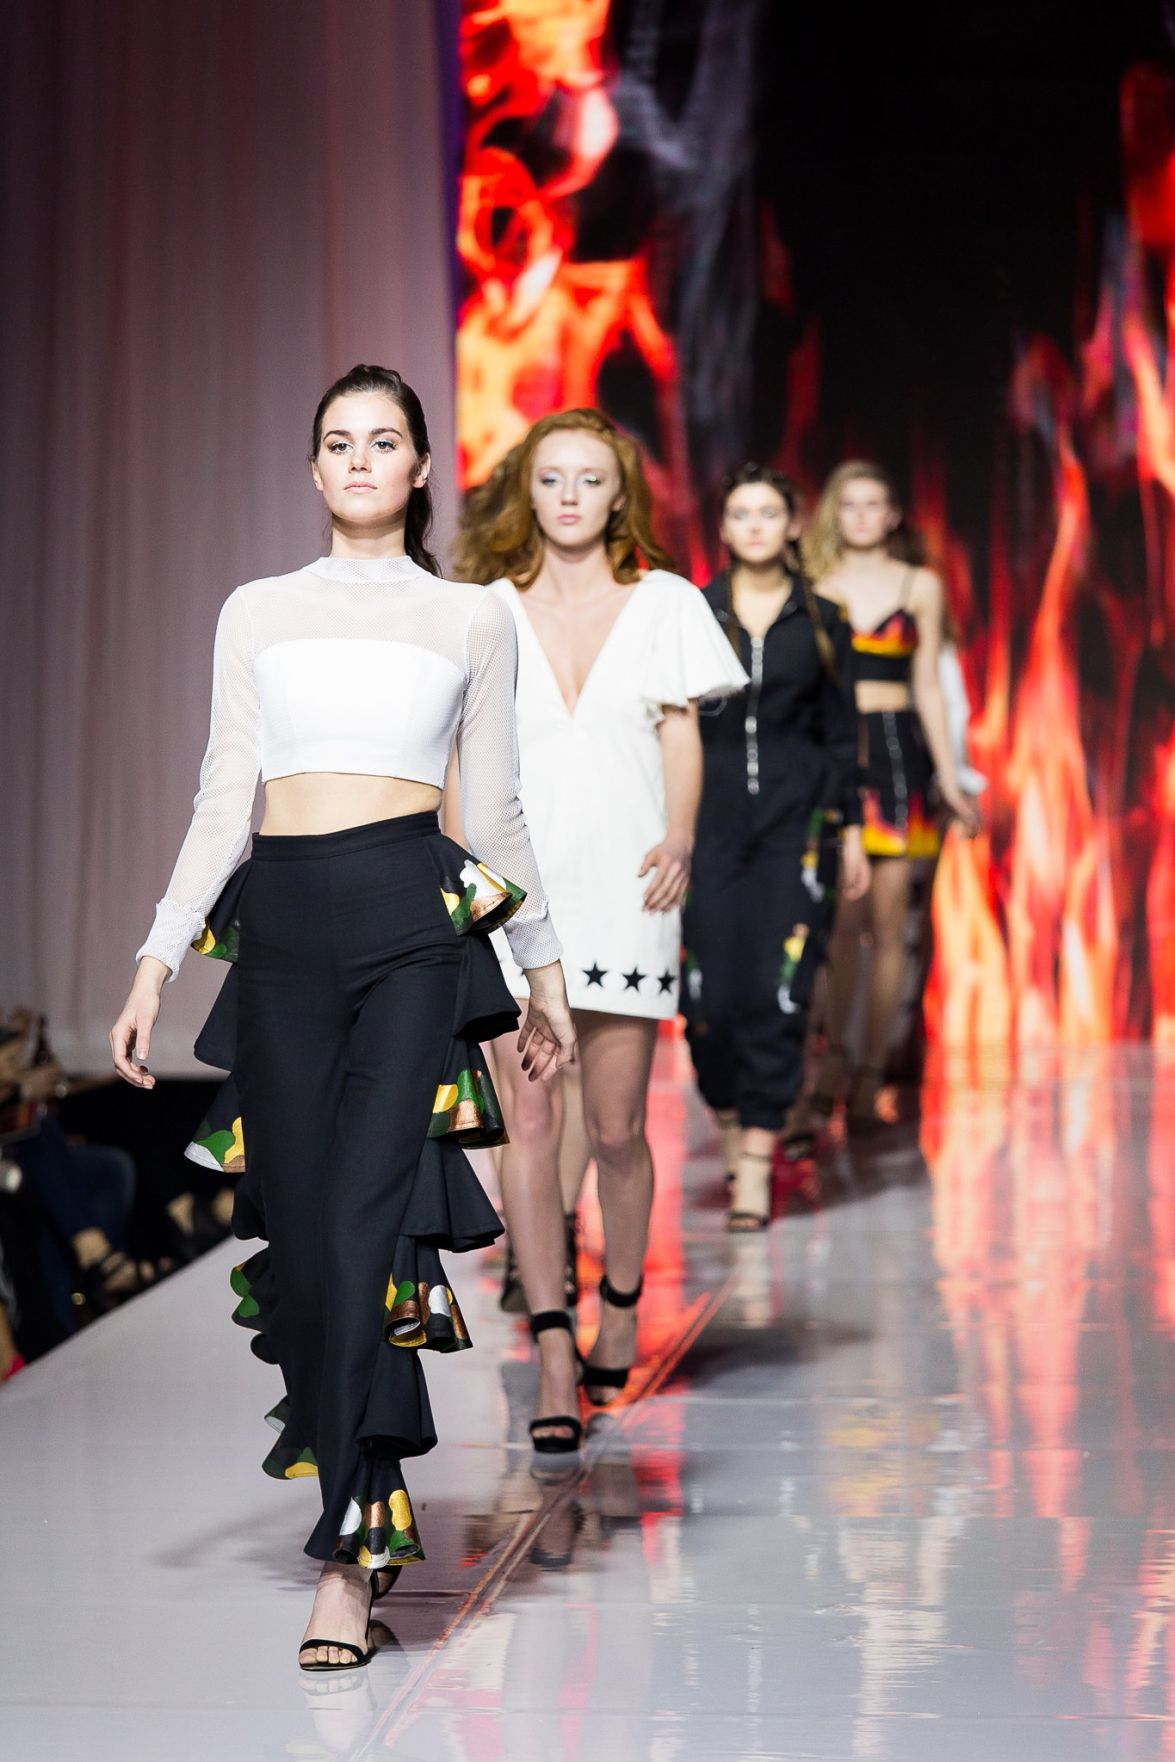 Review: The good, the bad and the ugly of Omaha Fashion Week | GO